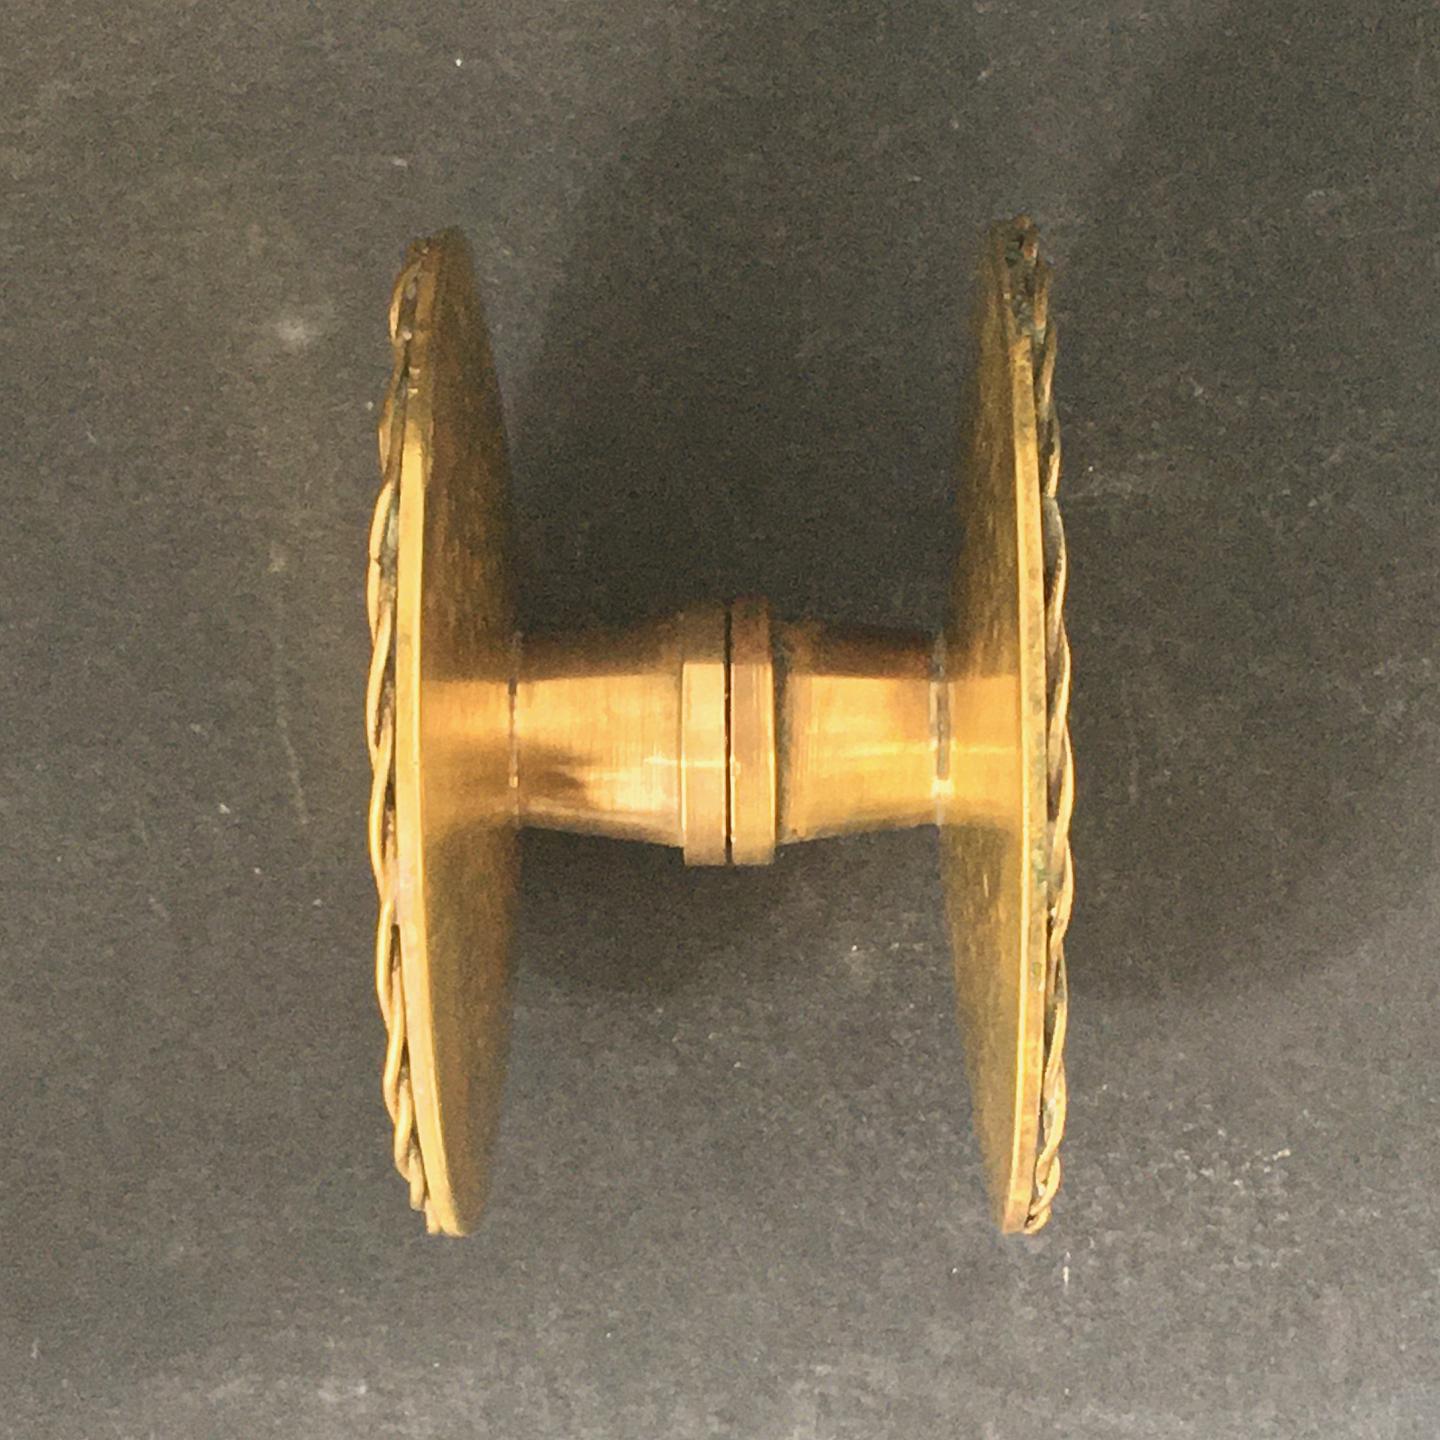 Metal Circular Push-Pull Door Handle in Brass, Mid-20th Century, France For Sale